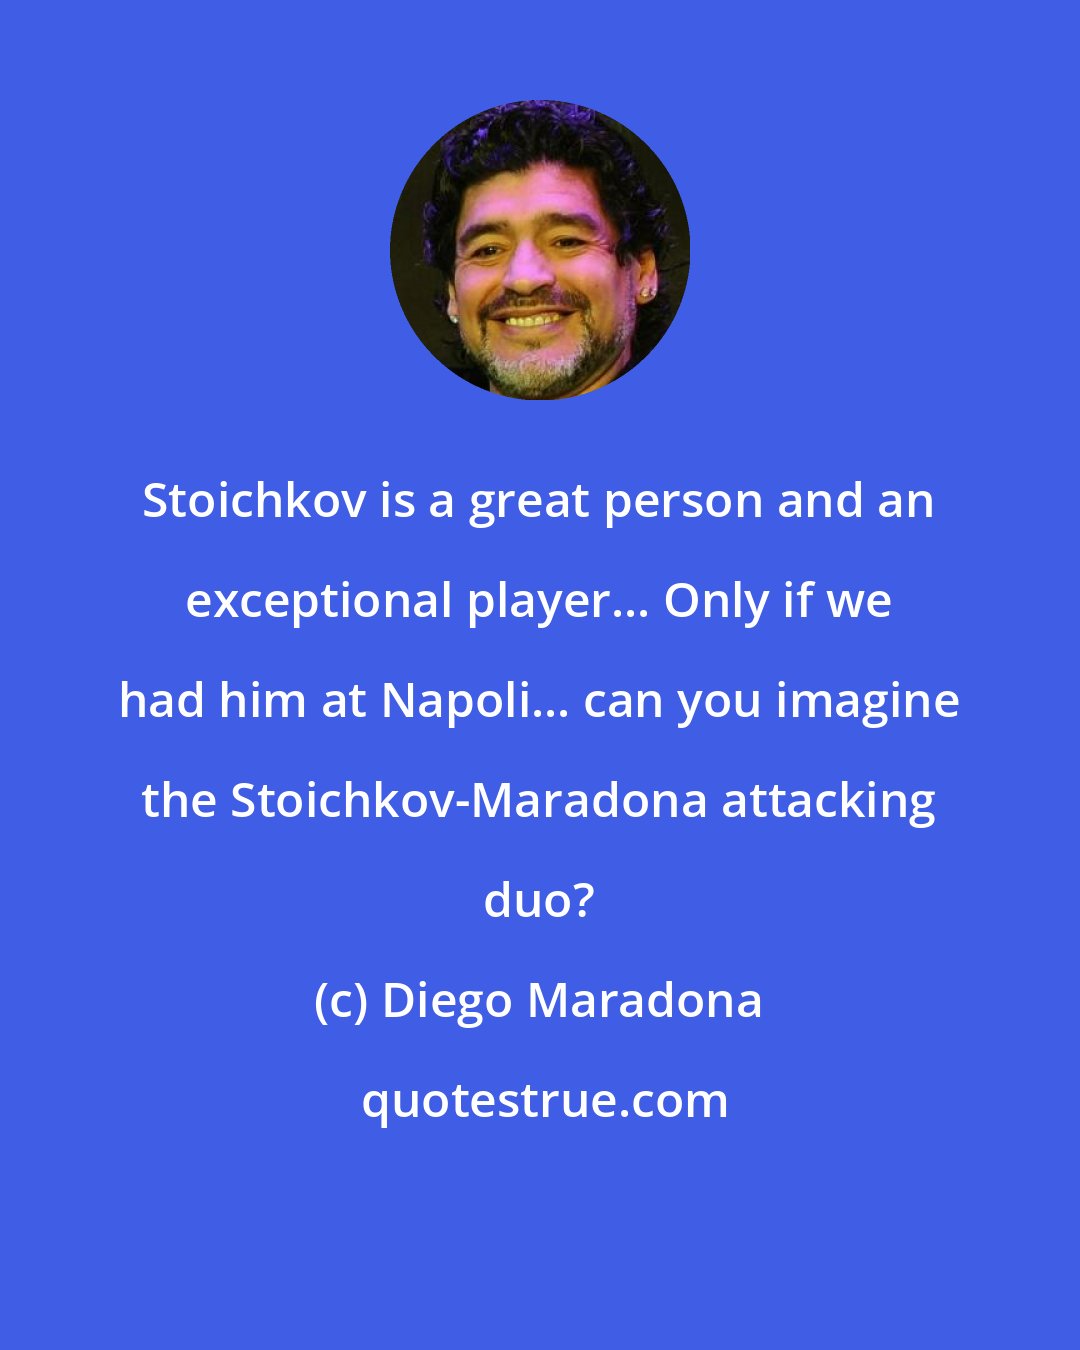 Diego Maradona: Stoichkov is a great person and an exceptional player... Only if we had him at Napoli... can you imagine the Stoichkov-Maradona attacking duo?